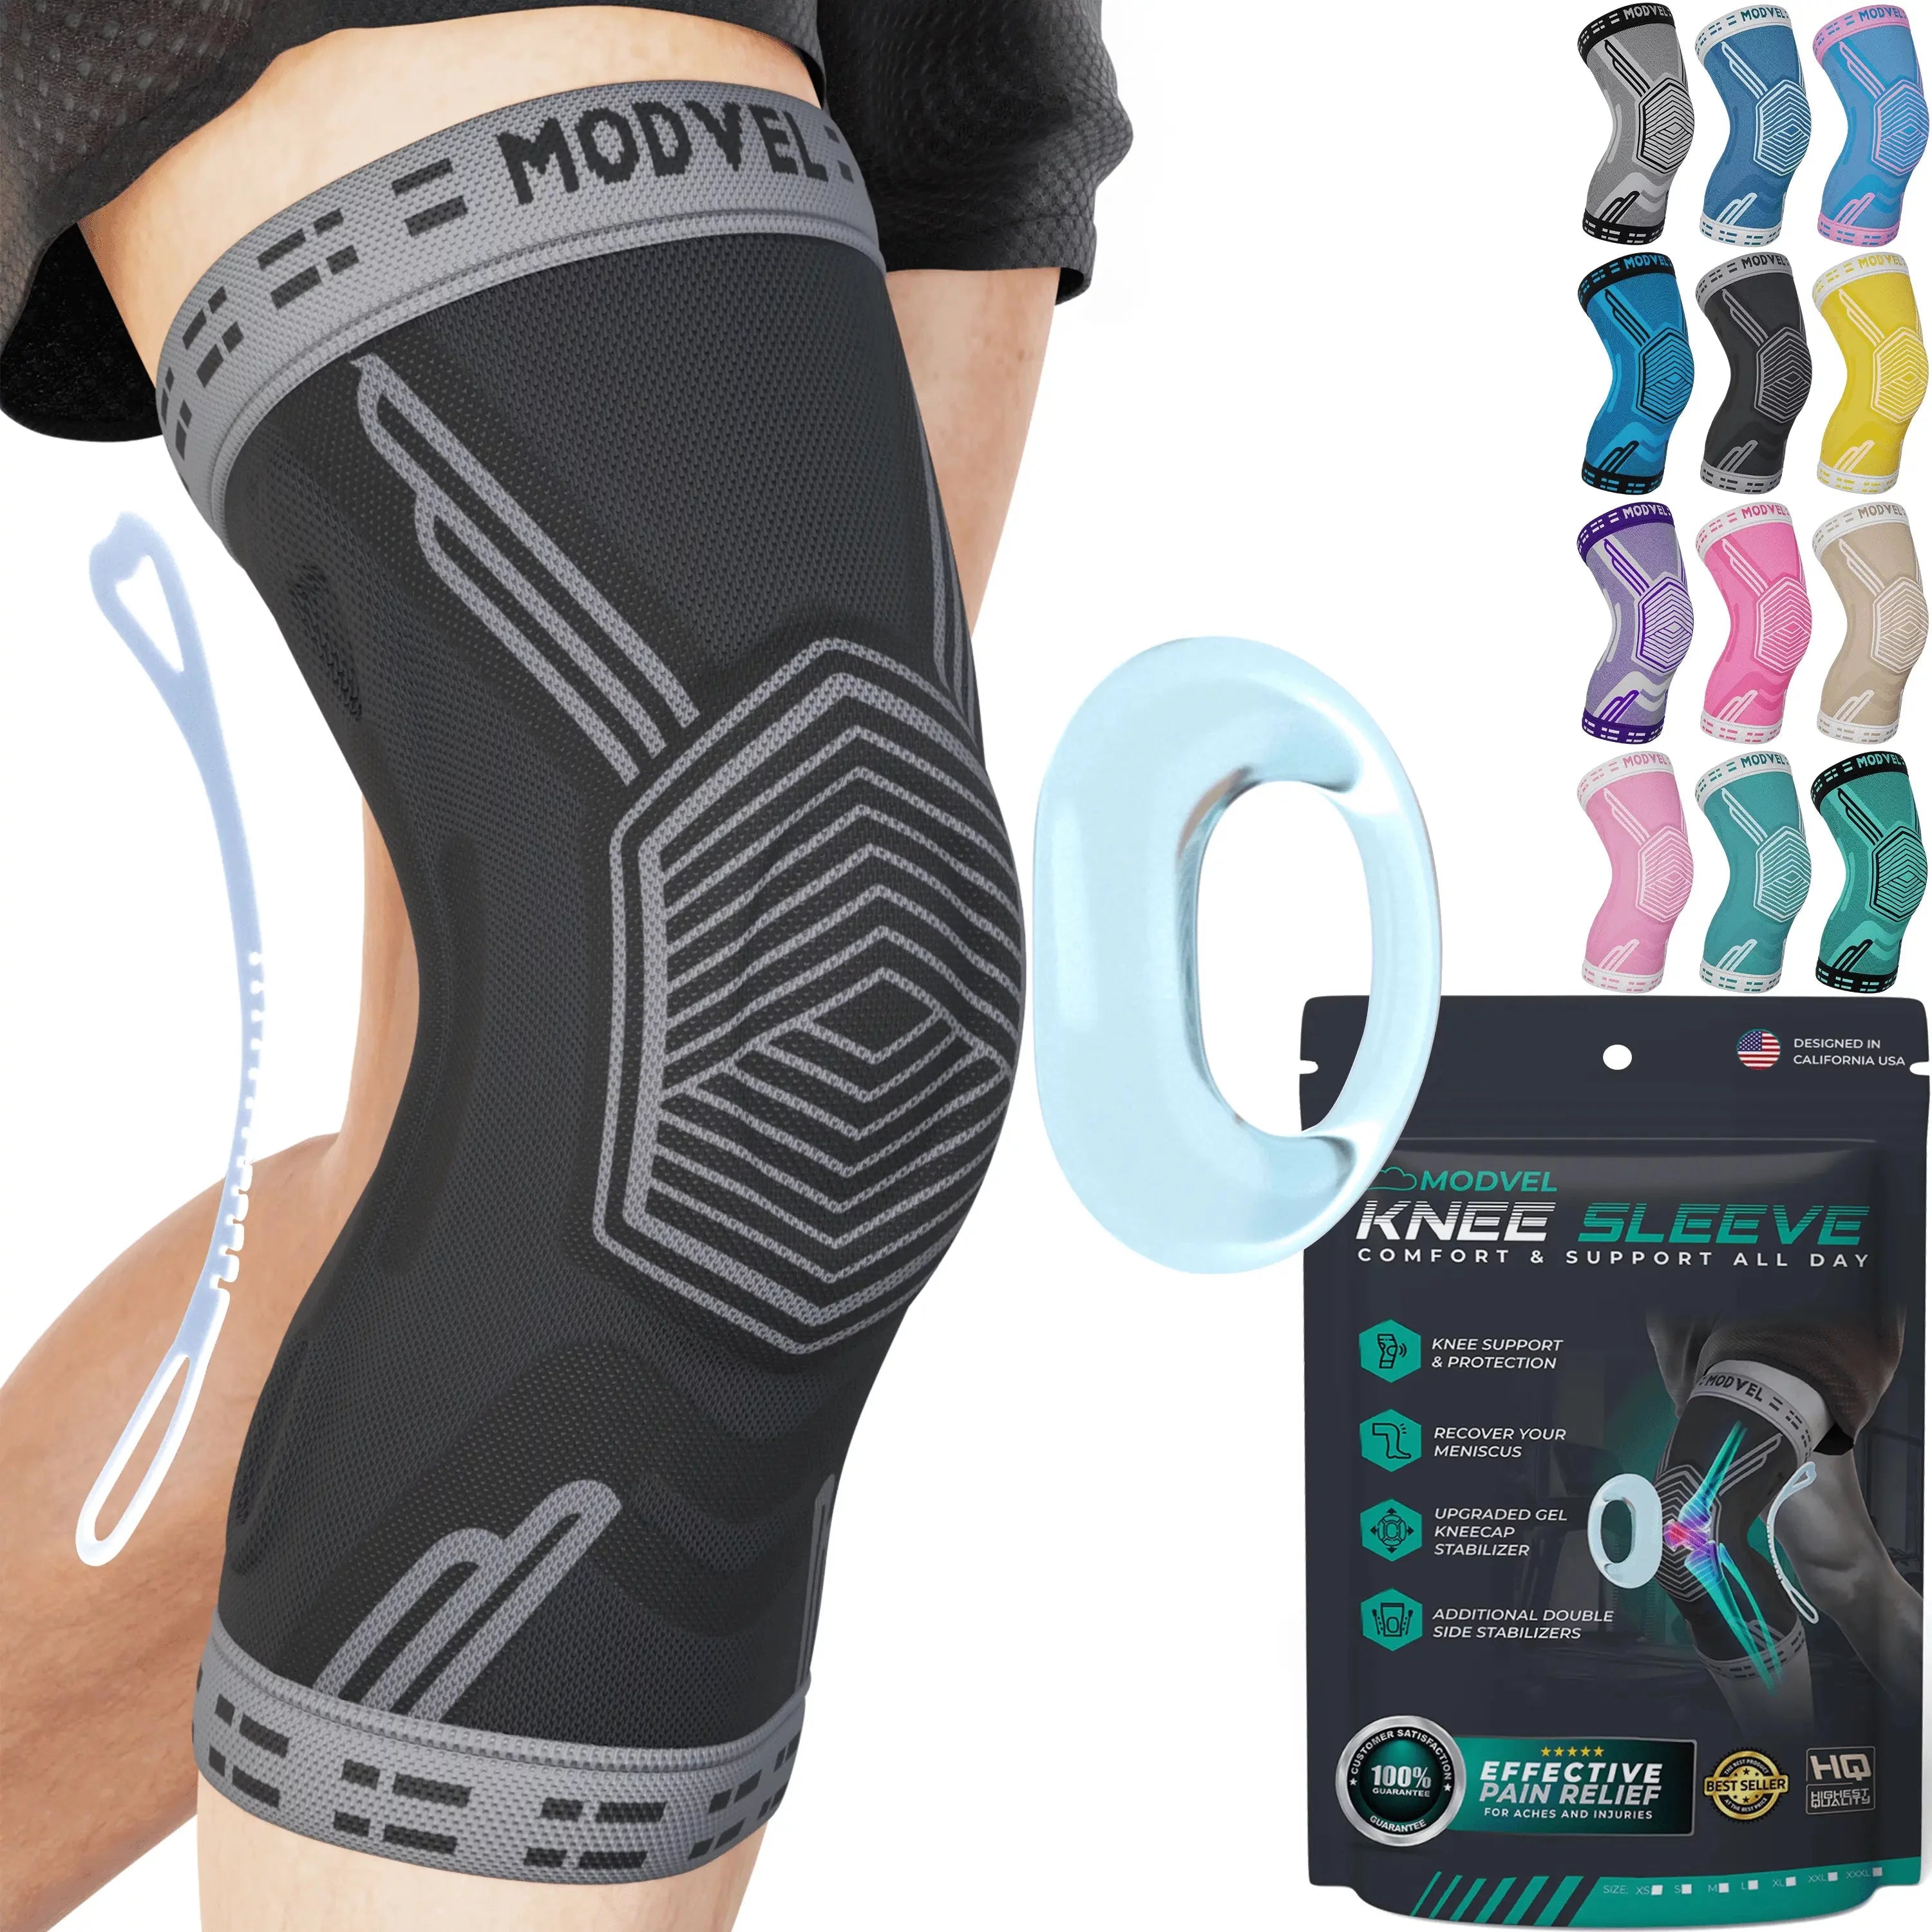 Modvel Knee Brace for Knee Pain Relief, Joint Stability and